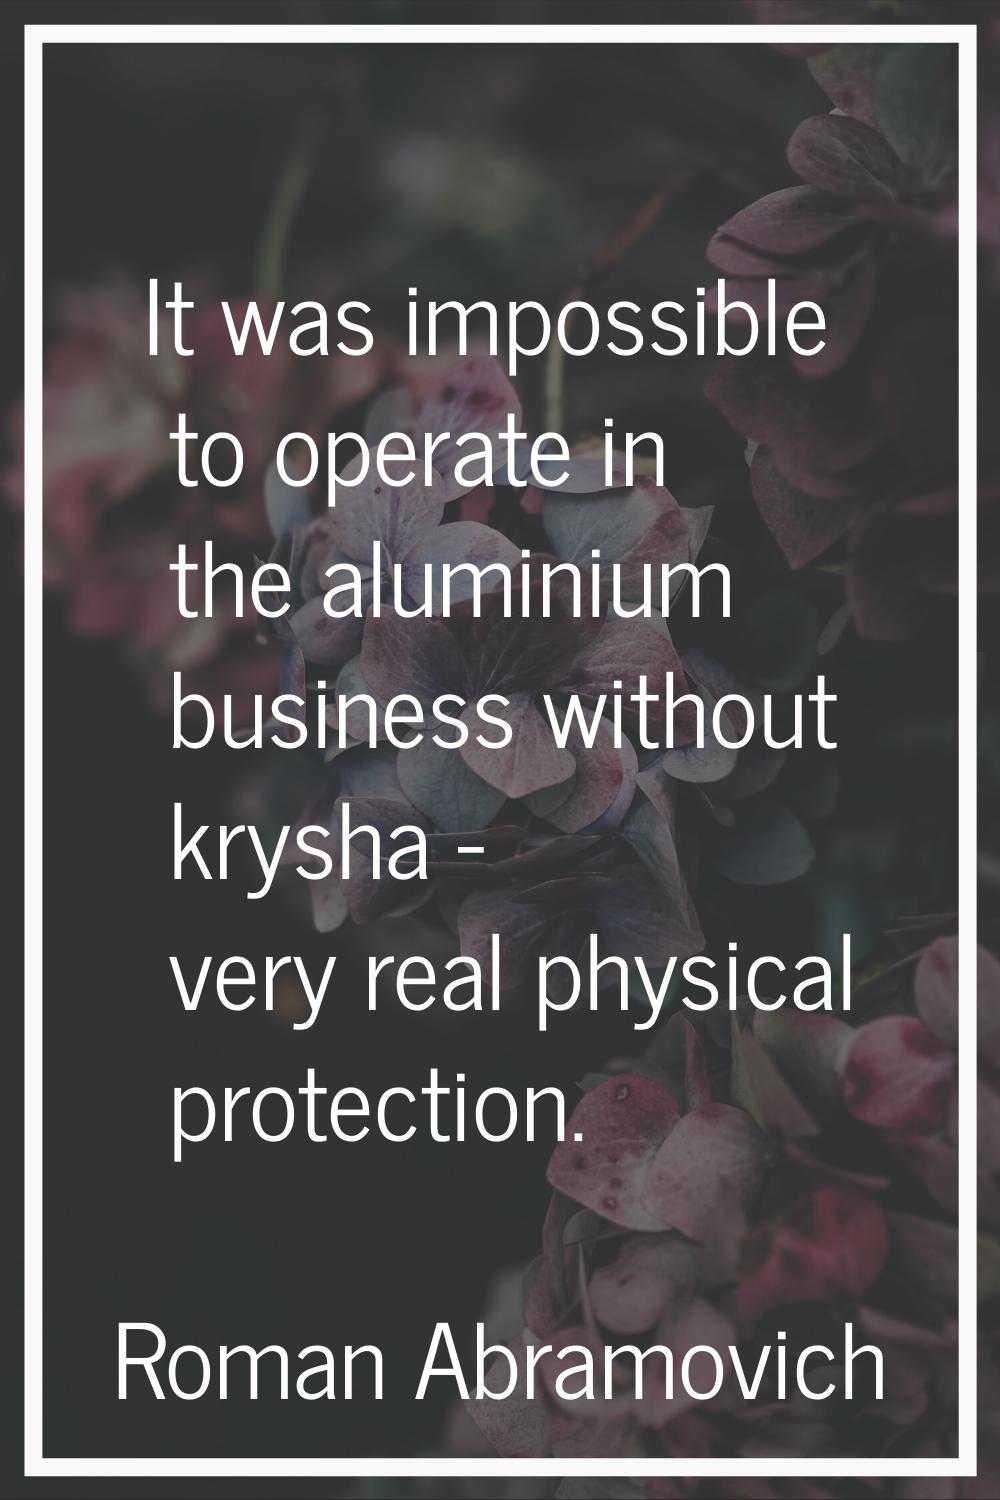 It was impossible to operate in the aluminium business without krysha - very real physical protecti